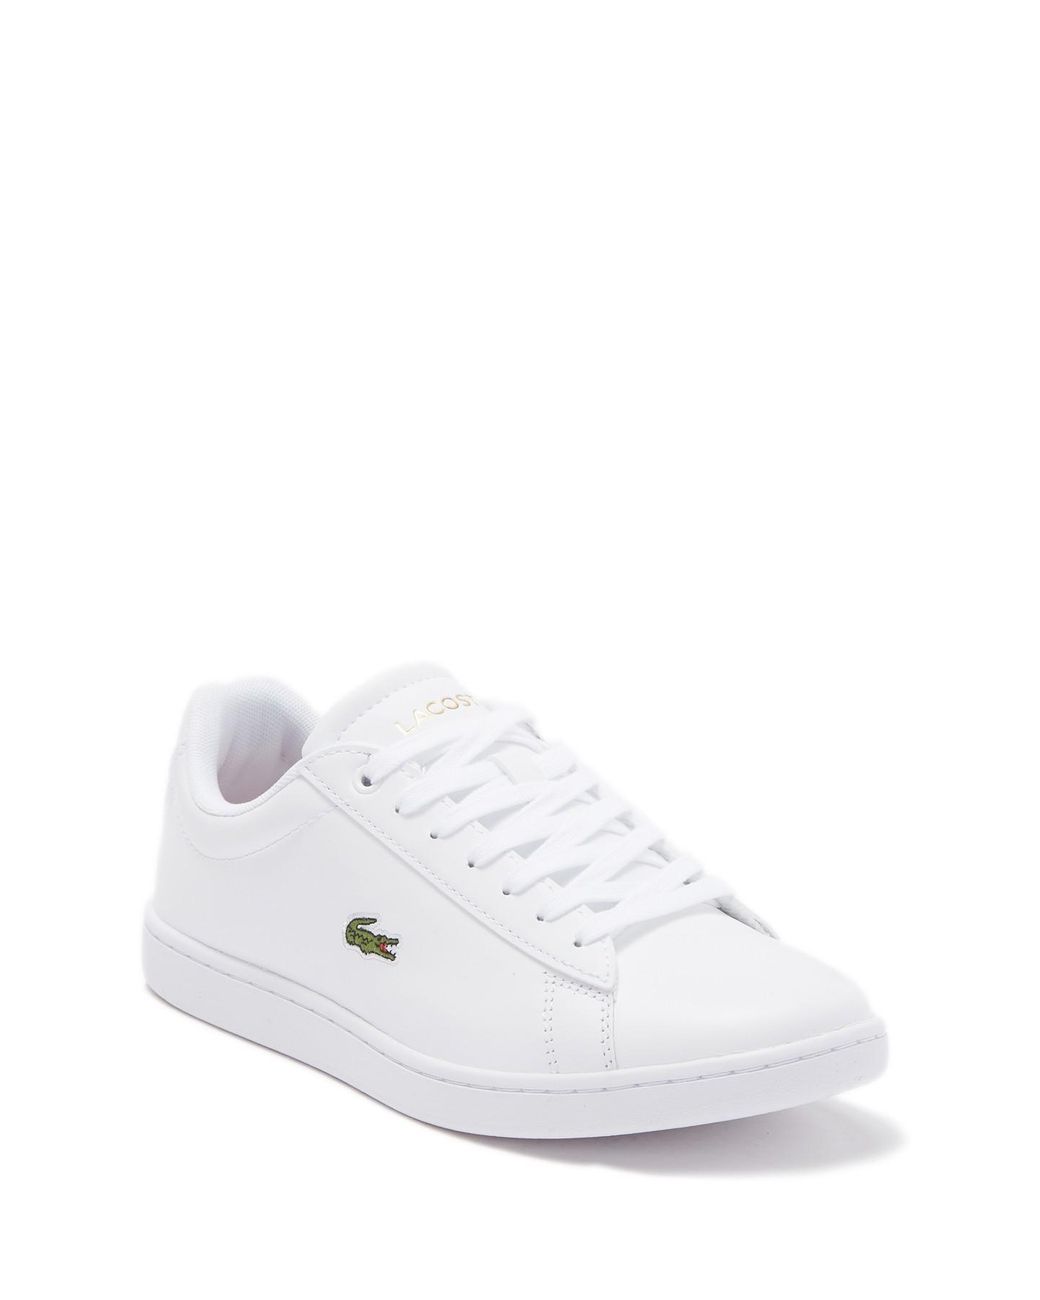 Lacoste Hydez 119 Leather Sneaker in White | Lyst